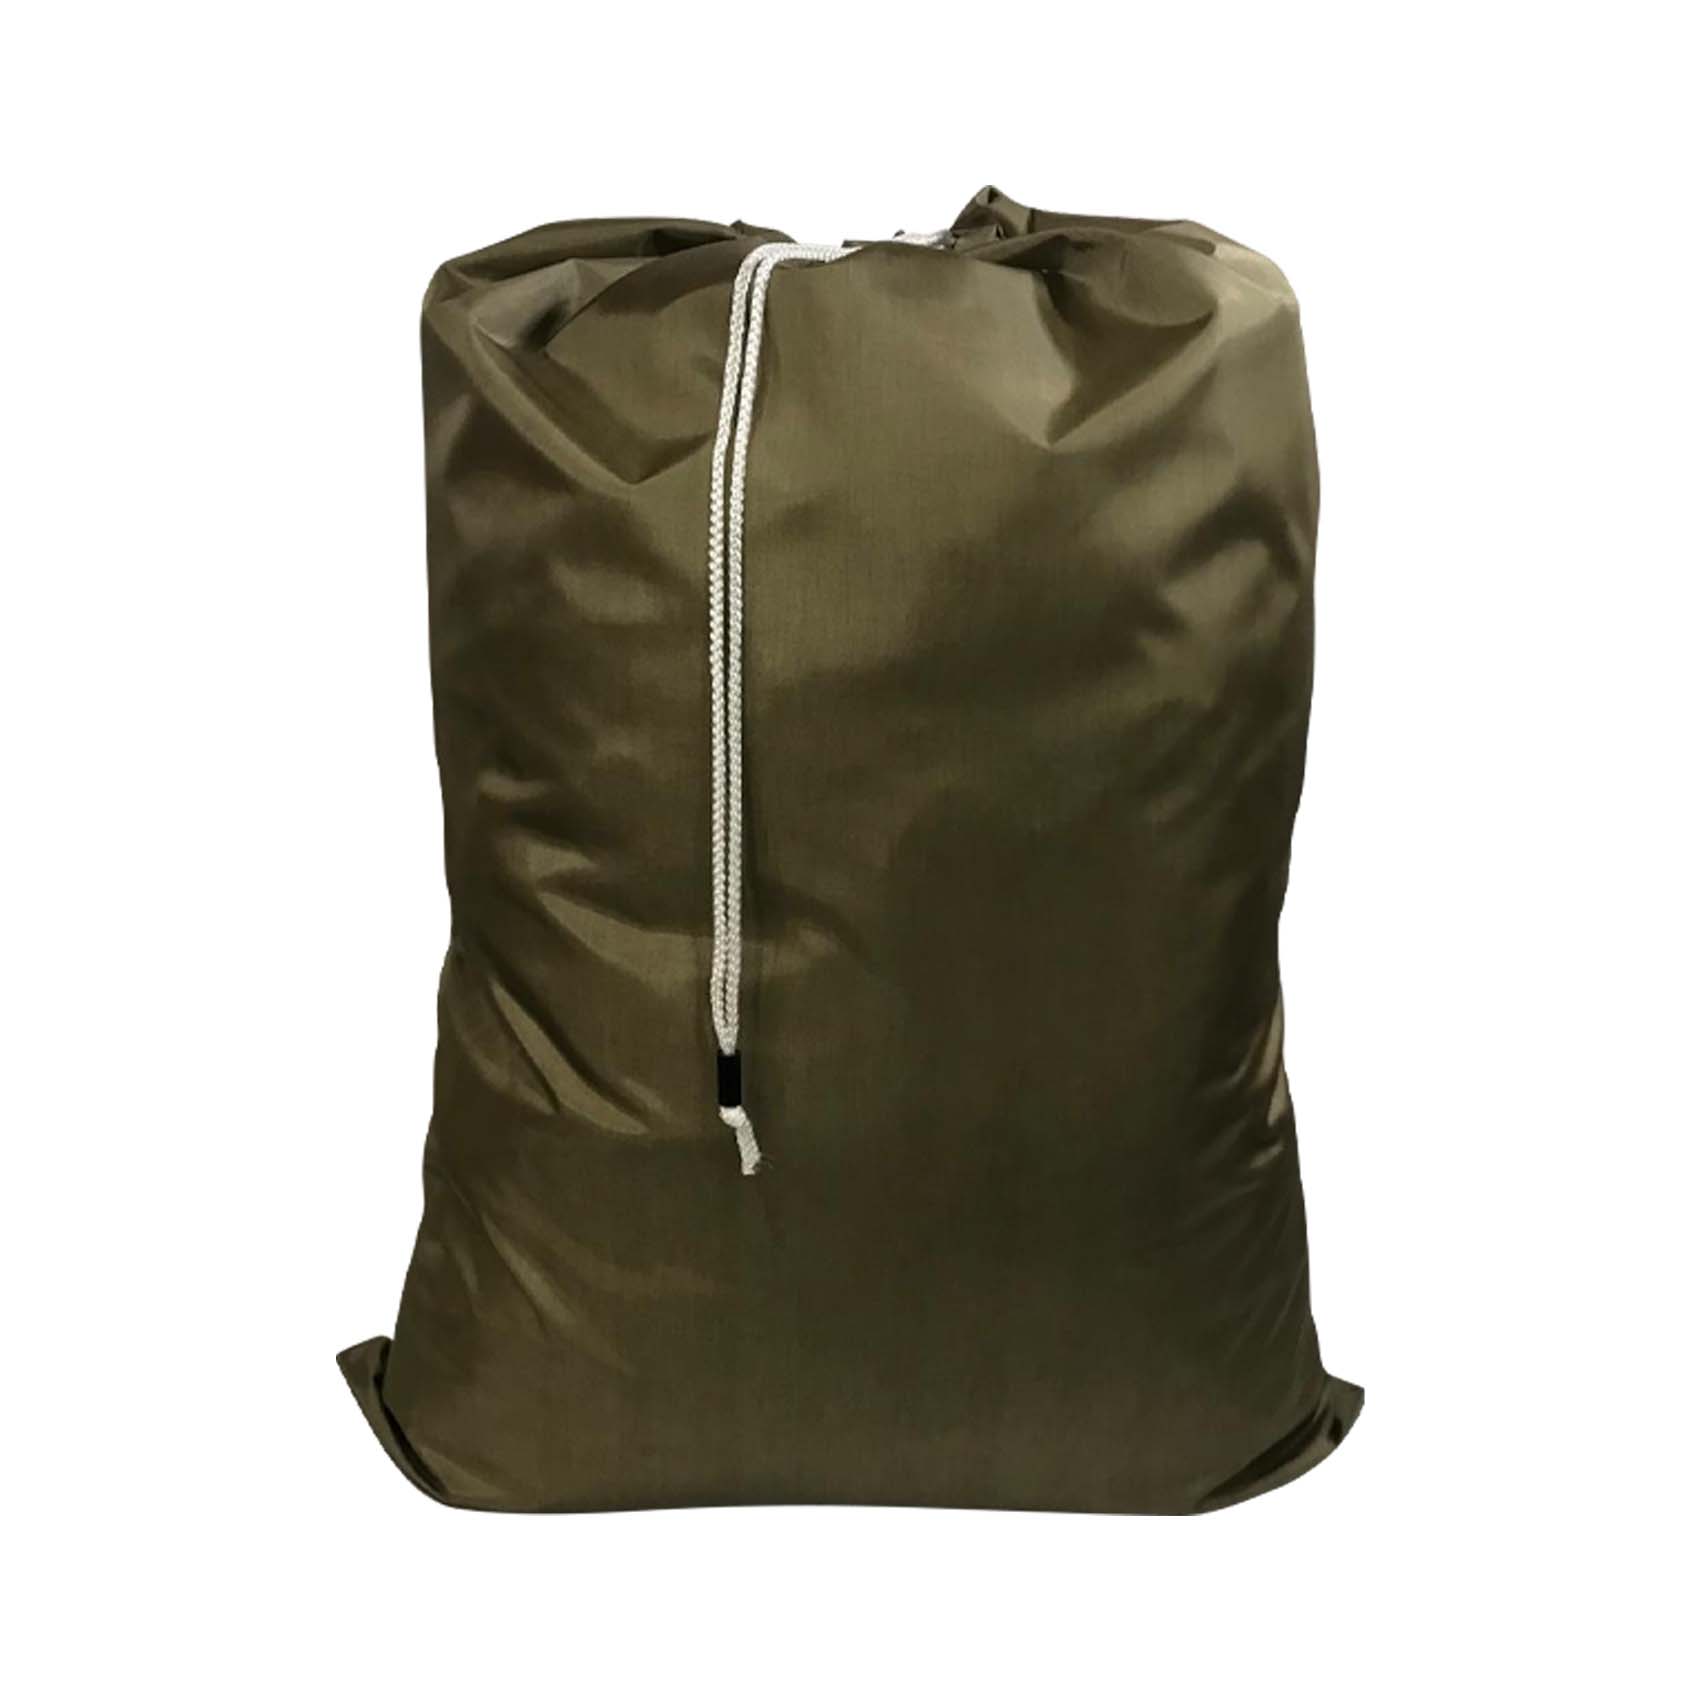 30'' x 40'' Heavy Nylon, 200 deniers, Waterproof. Color: Coyote brown Color, $1.95 / 1 bag, $117.00/1Box, 60 pcs/box, Sold by the Box.